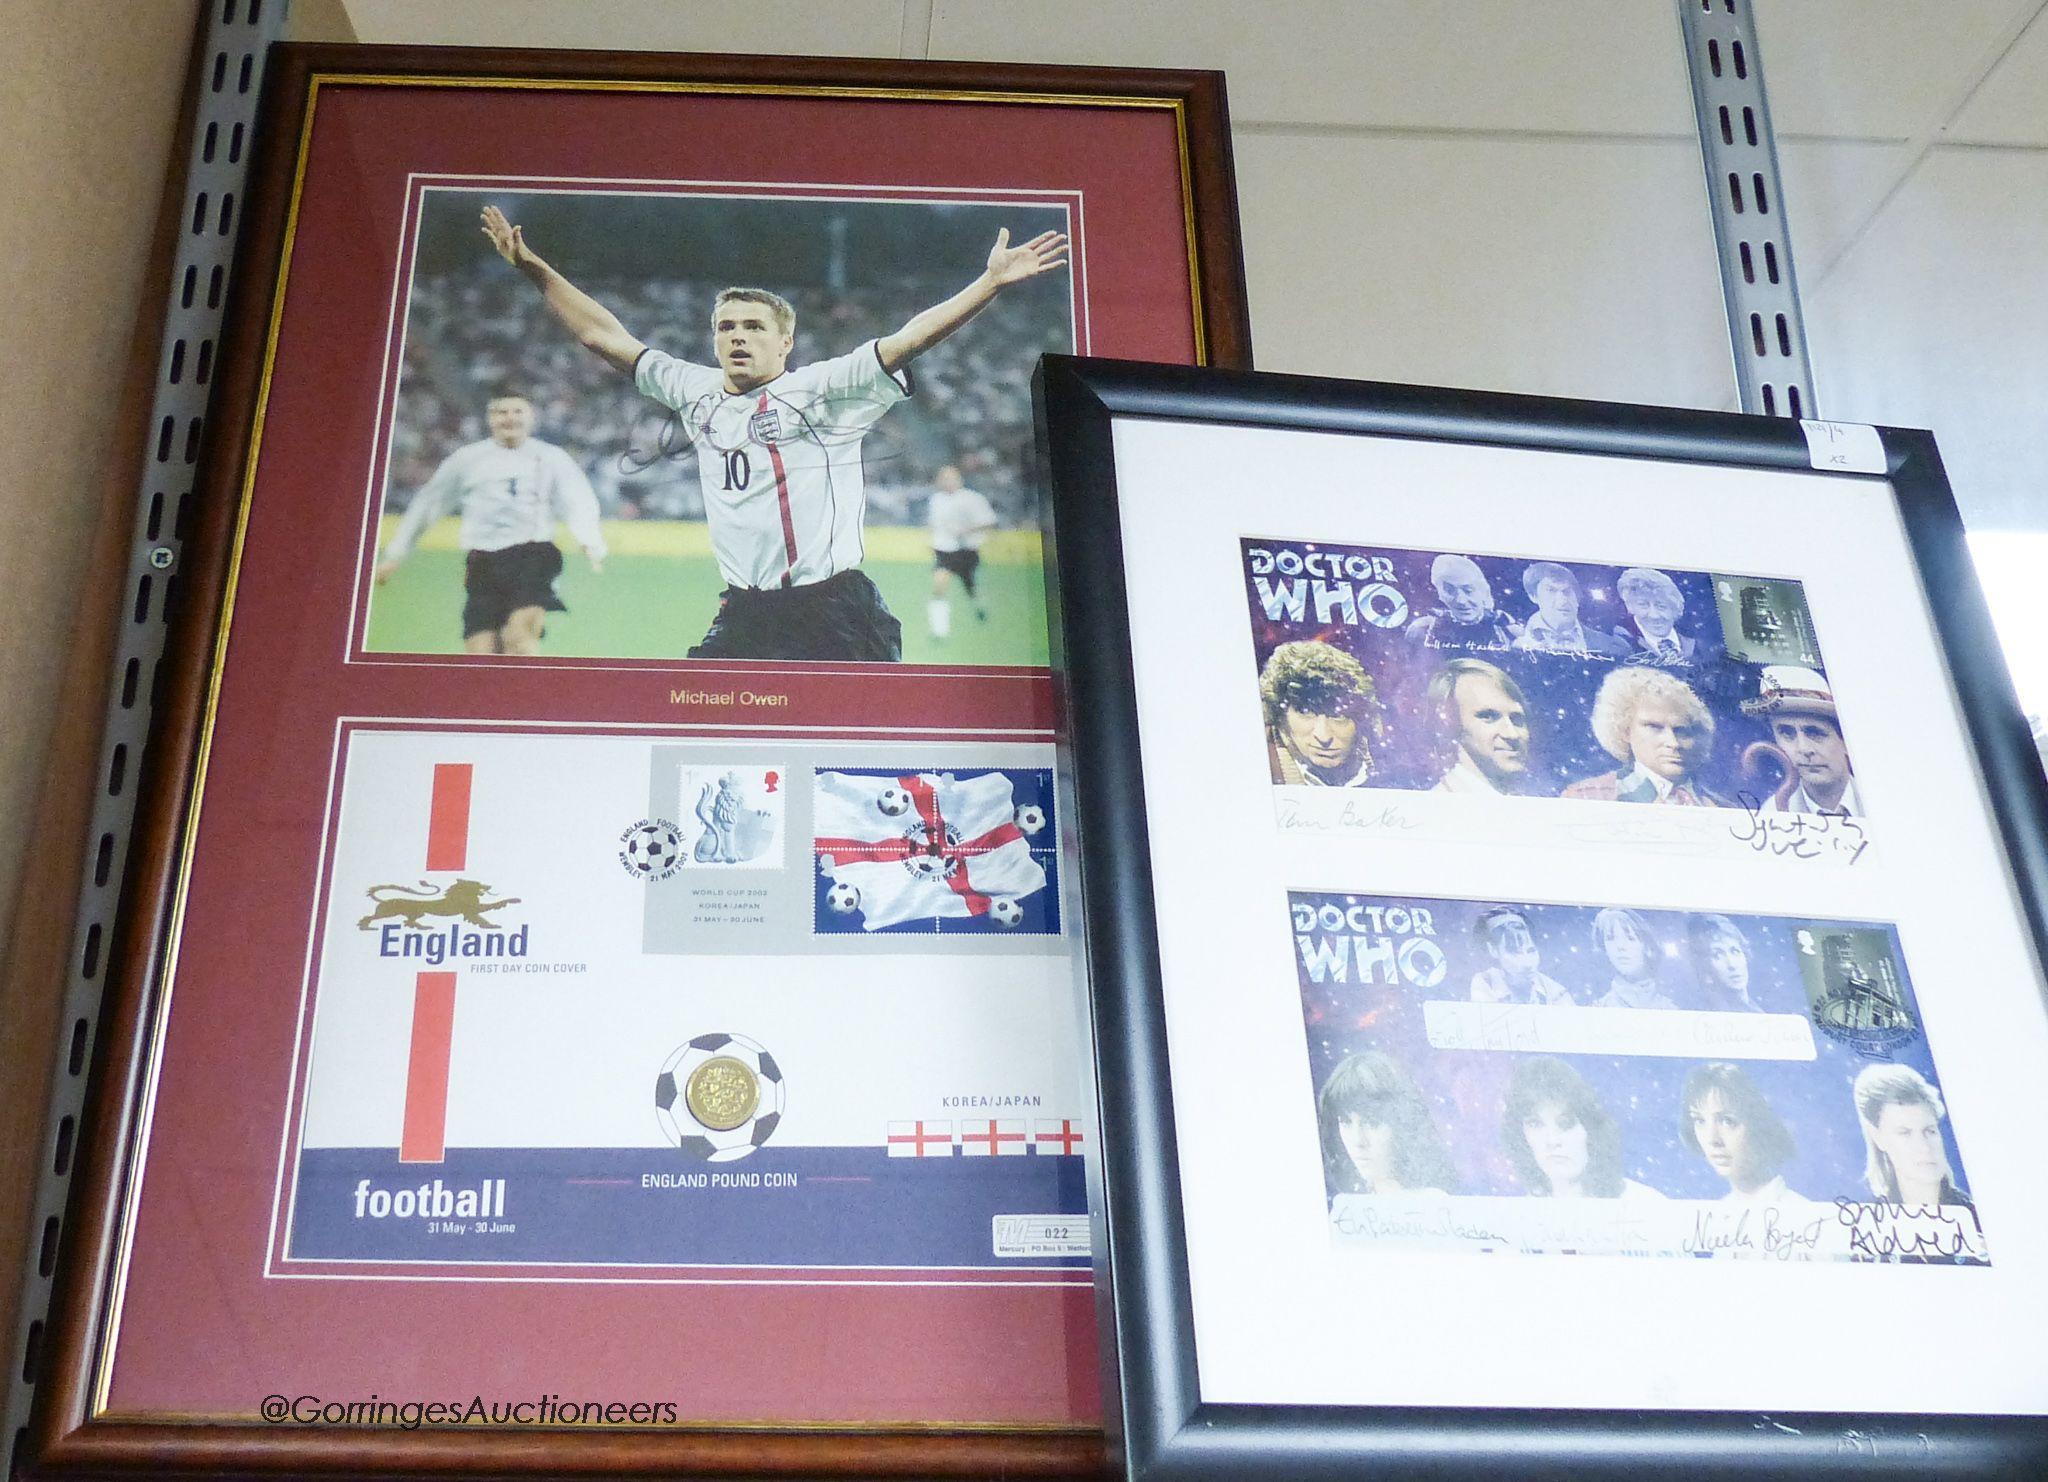 An autographed First Day Cover, Michael Owen, and an autographed display of Dr Who characters